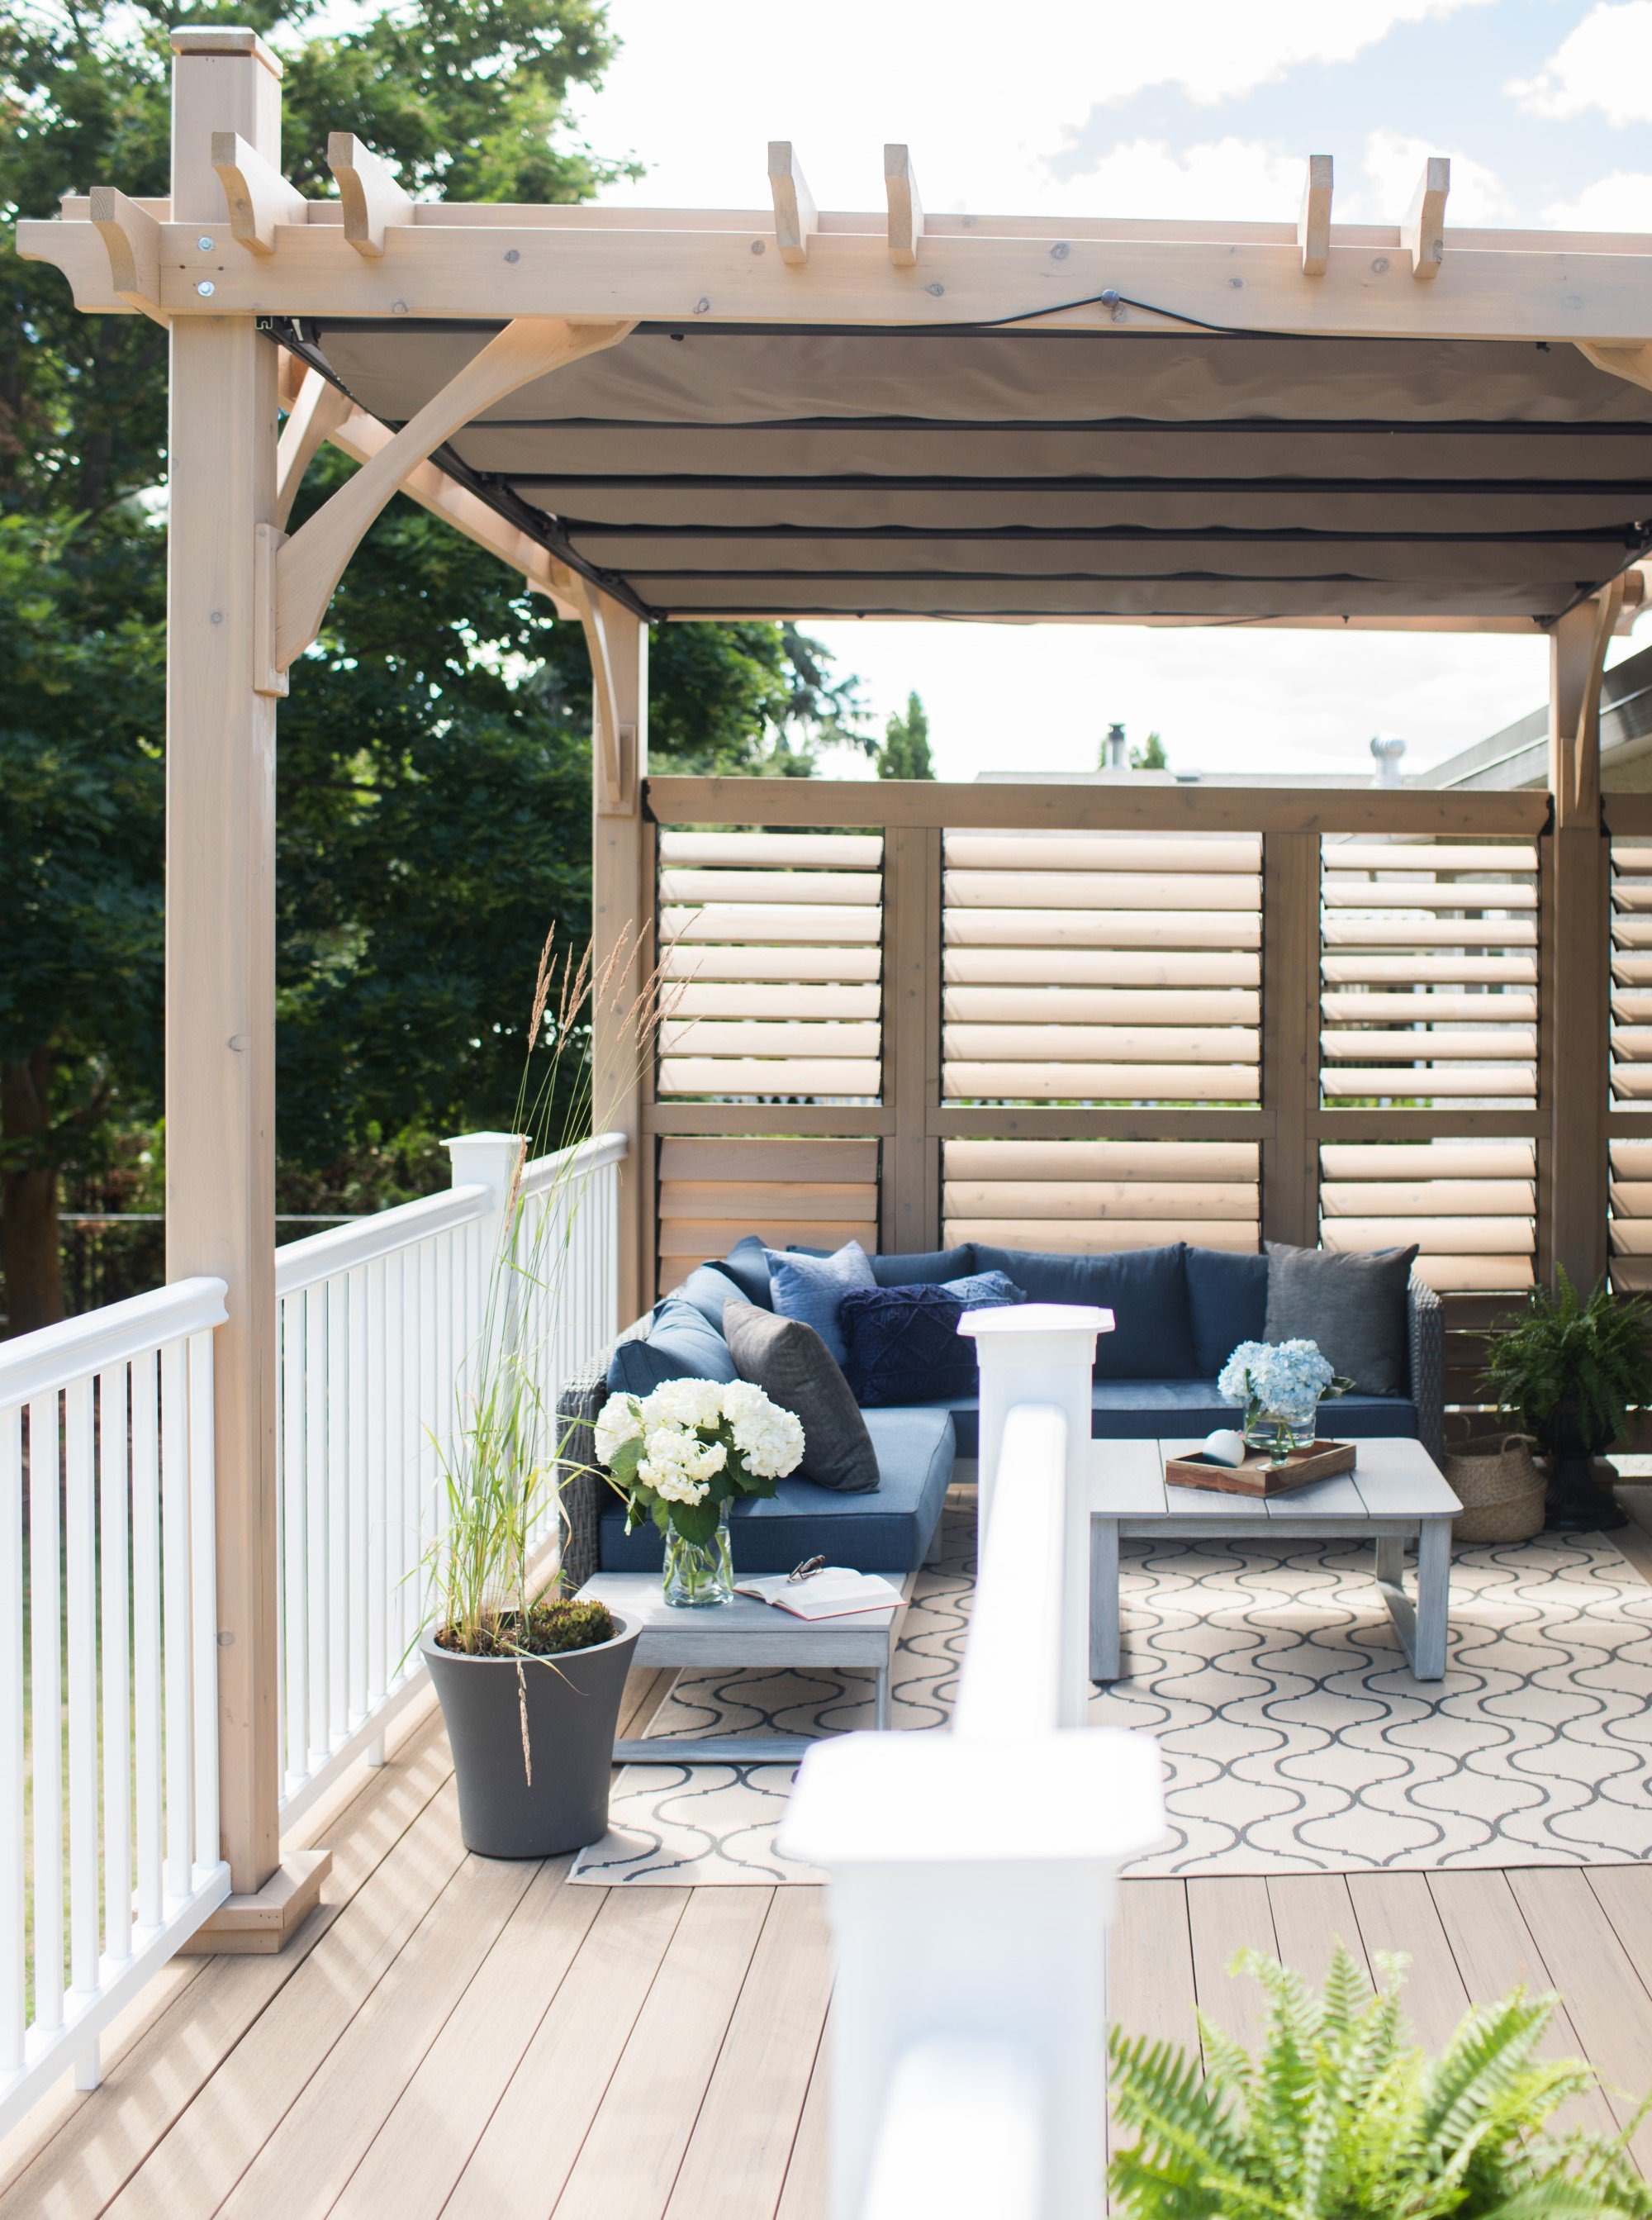 Pictures of Hot HGTV Hosts on Decks, Patios and Other Outdoor Spaces